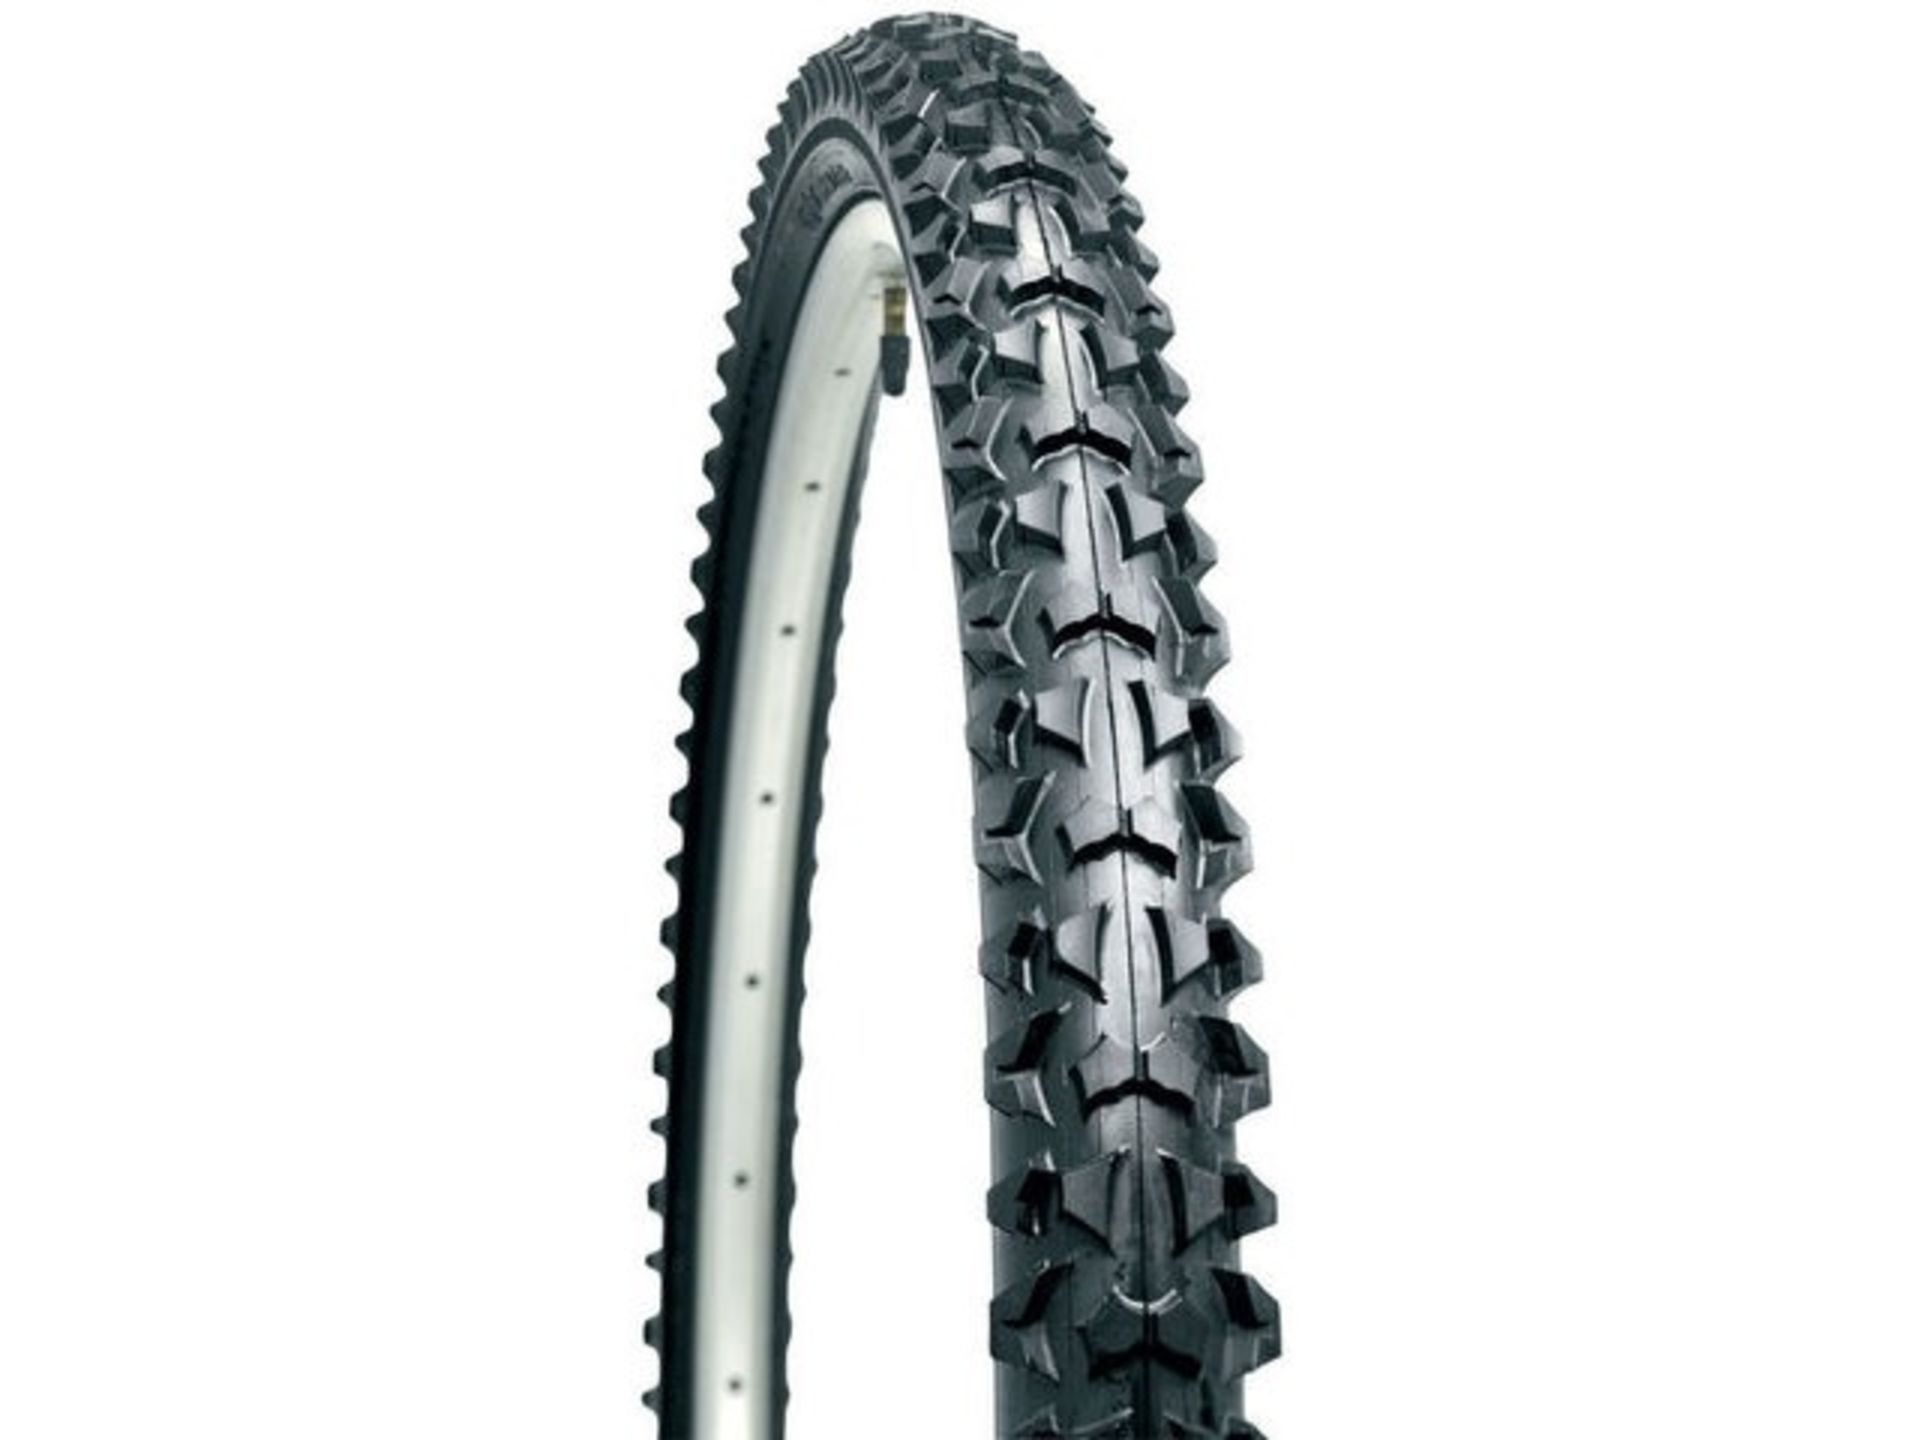 V 26 x 1.95 Raleigh Mountain Bike Tyre X  2  Bid price to be multiplied by Two